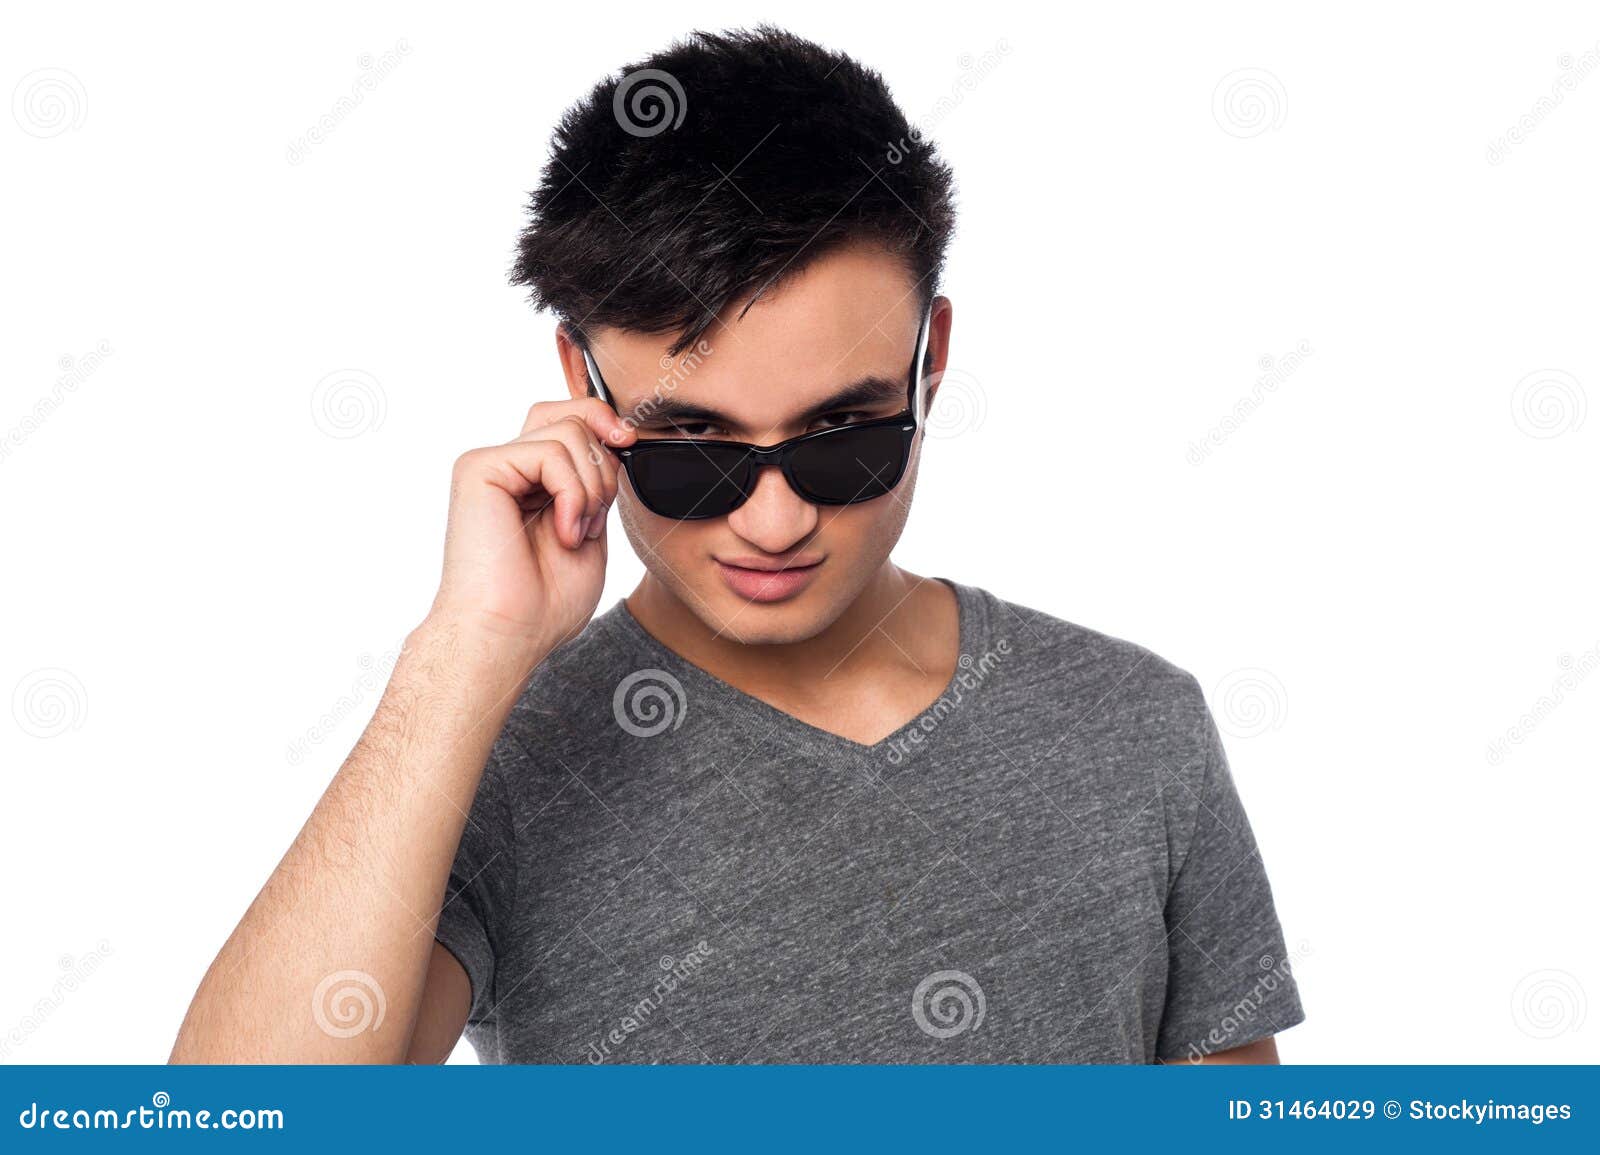 Fashion guy staring at you stock image. Image of happy - 31464029